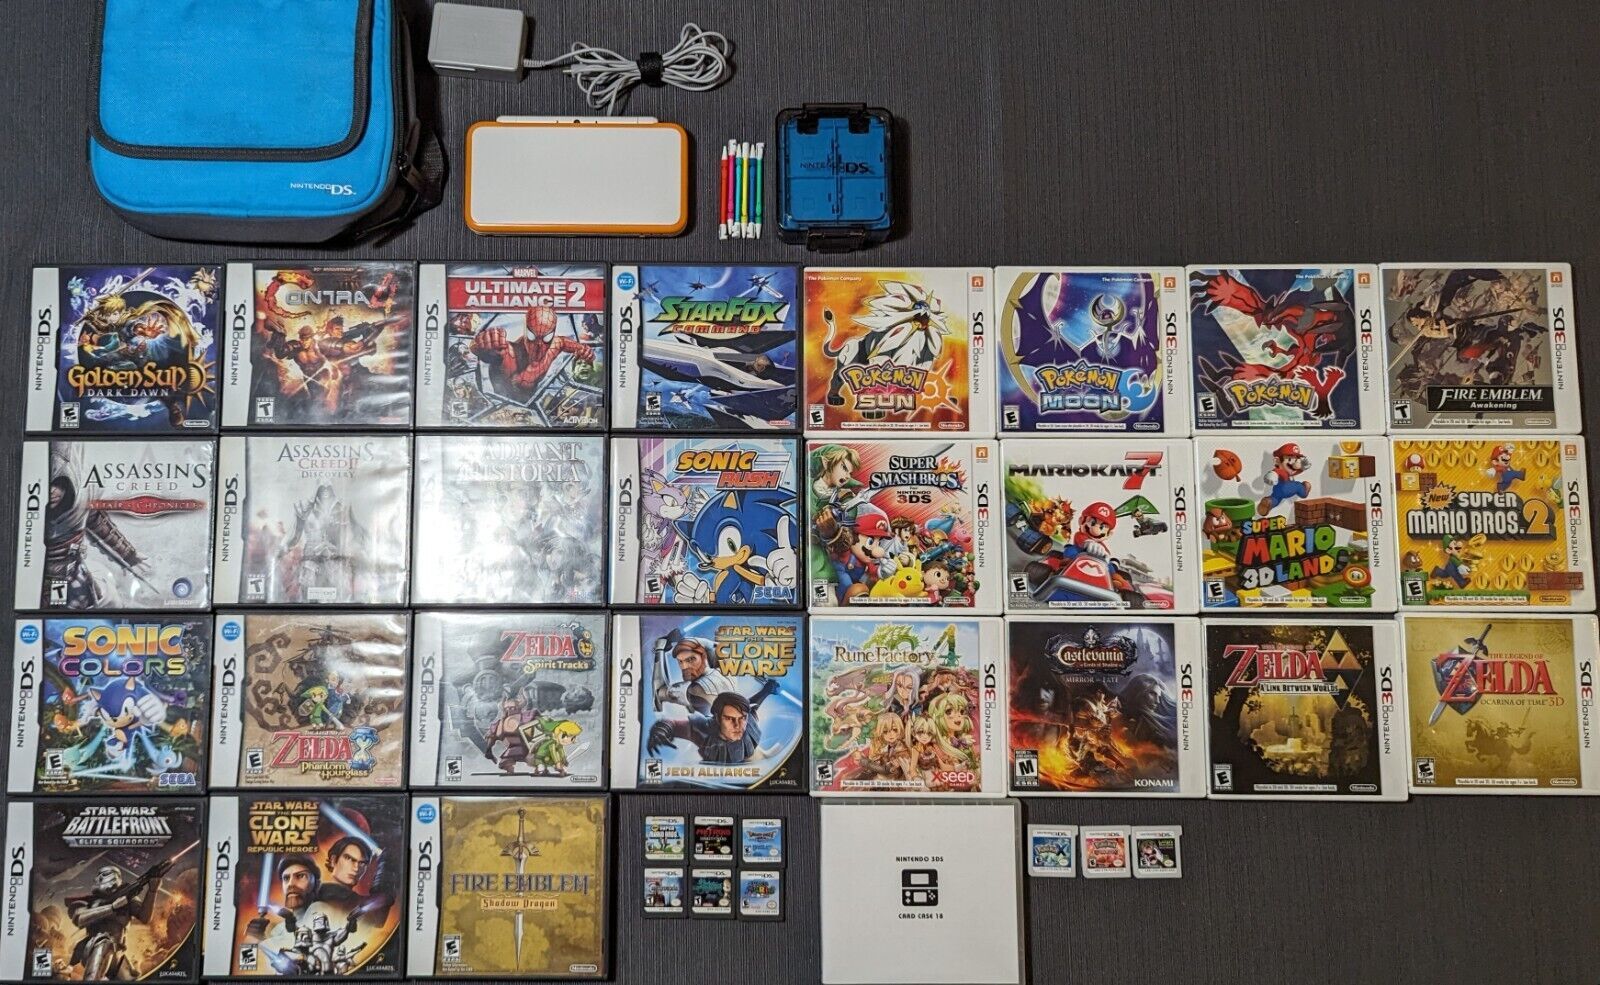 Primary image for New Nintendo 2DS XL (JAN-001) White and Orange w/ Games and Travel Case